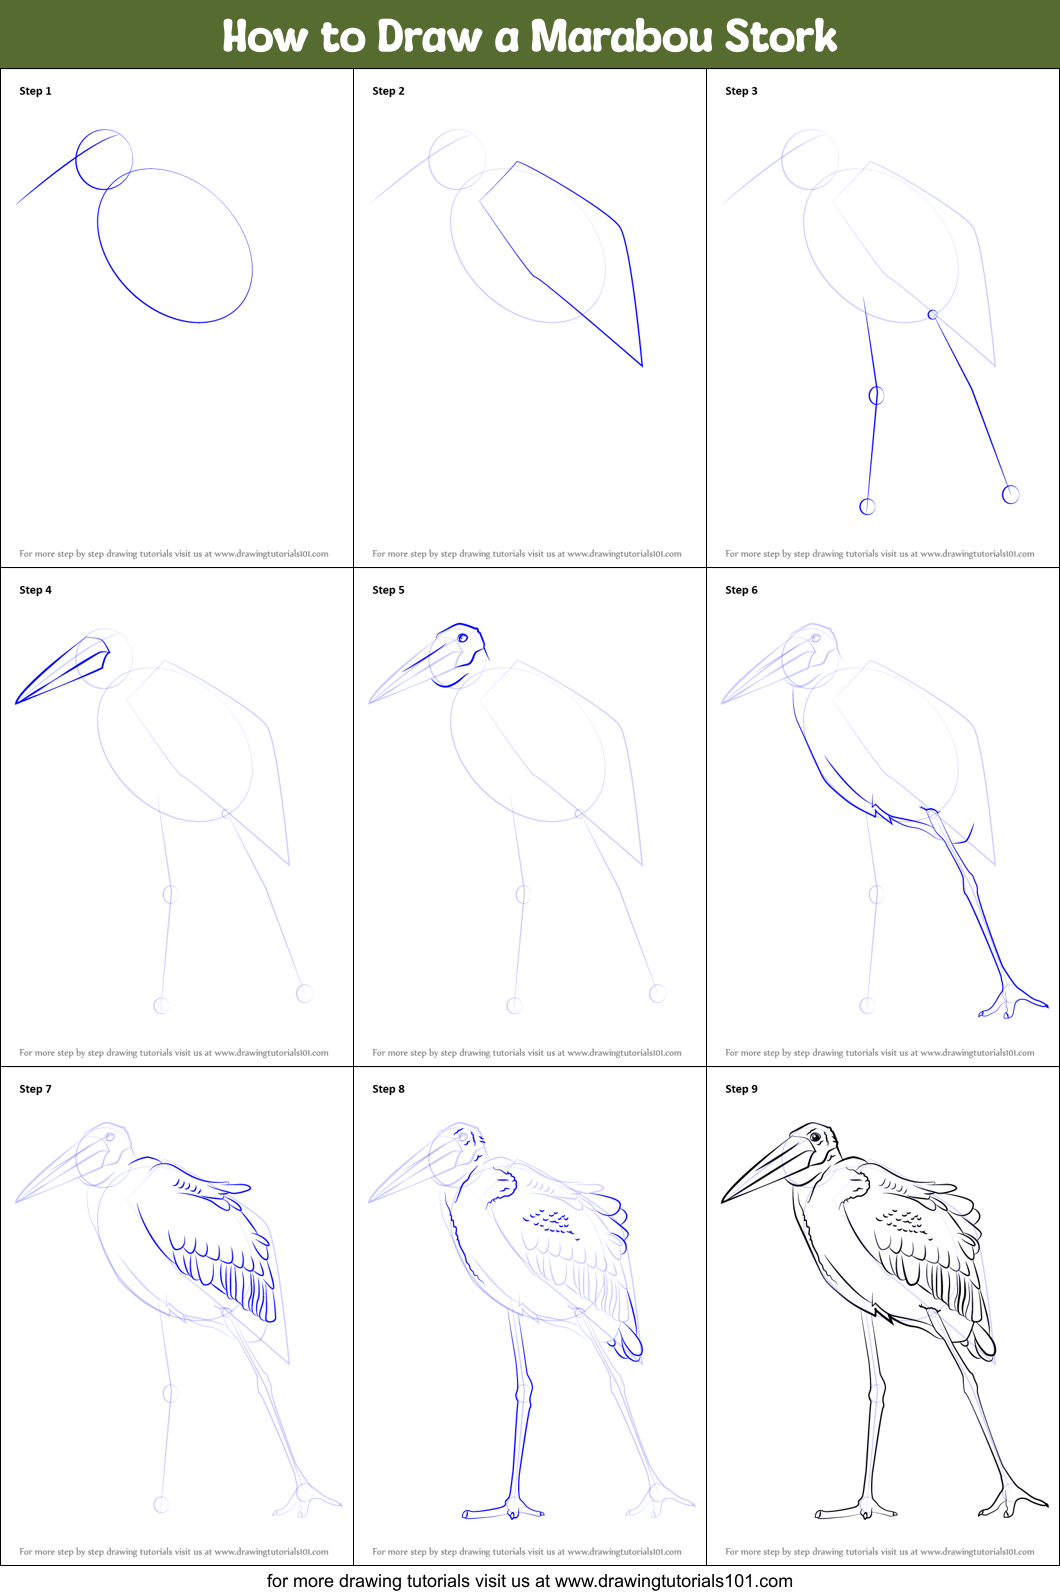 How to Draw a Marabou Stork printable step by step drawing sheet